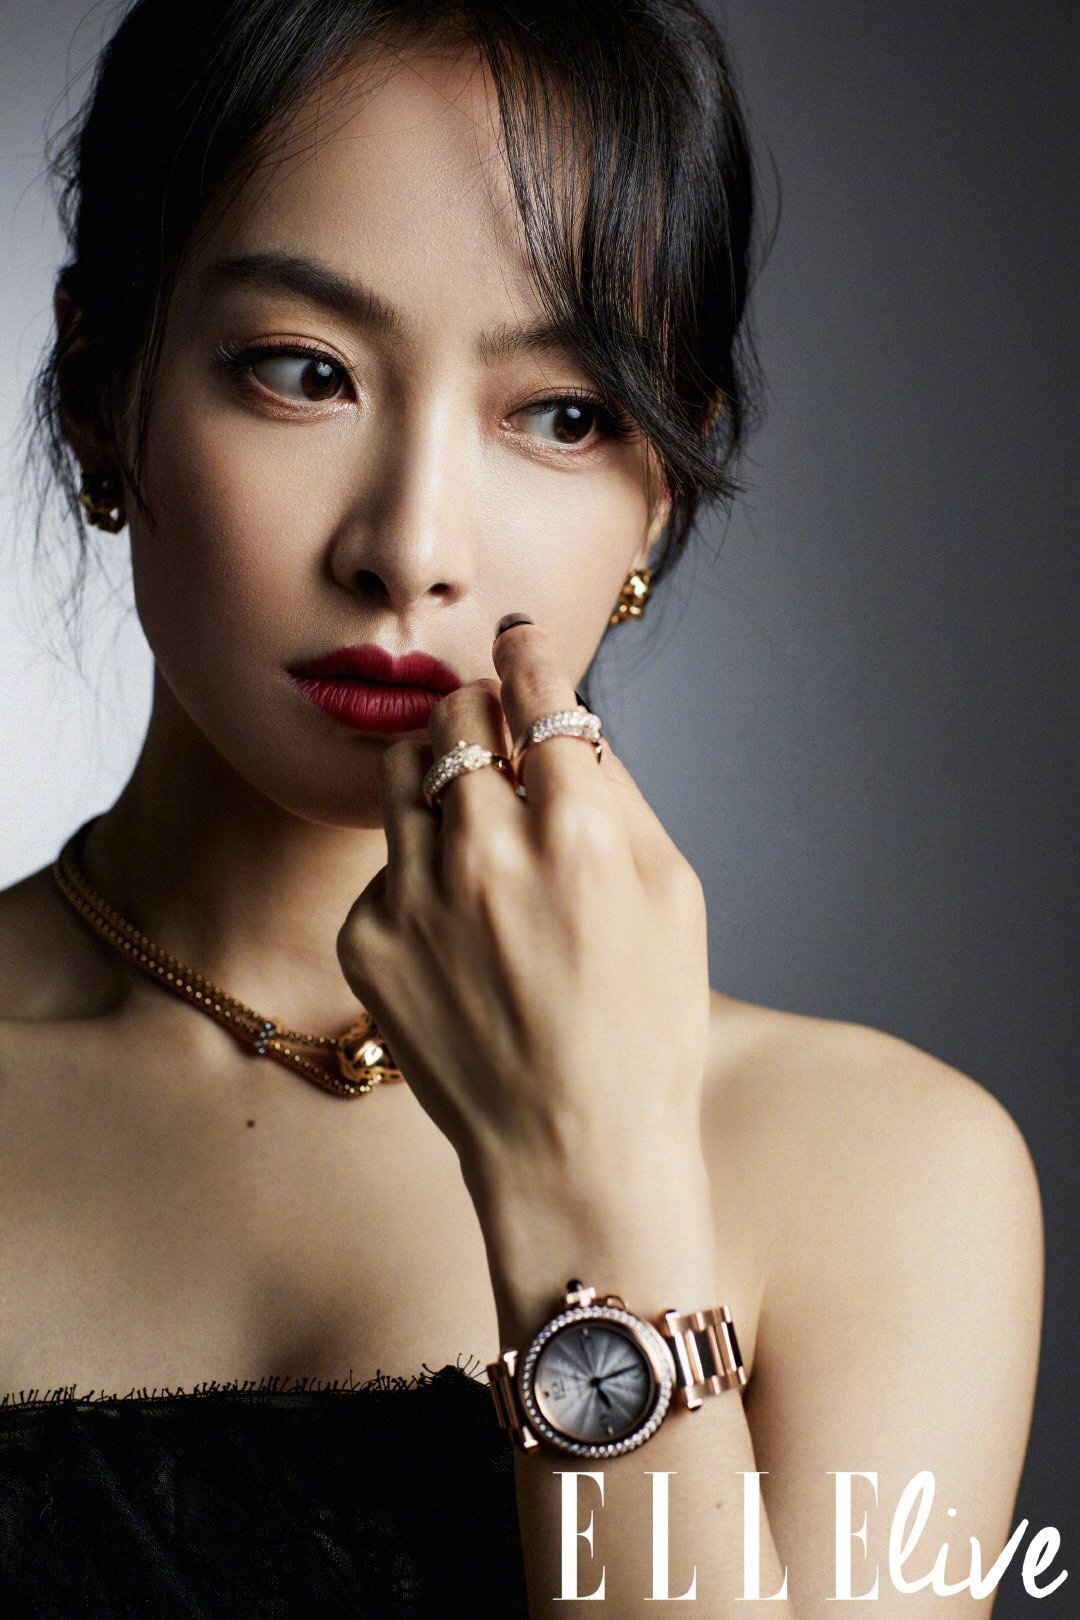 Victoria for Elle x Cartier | kpopping